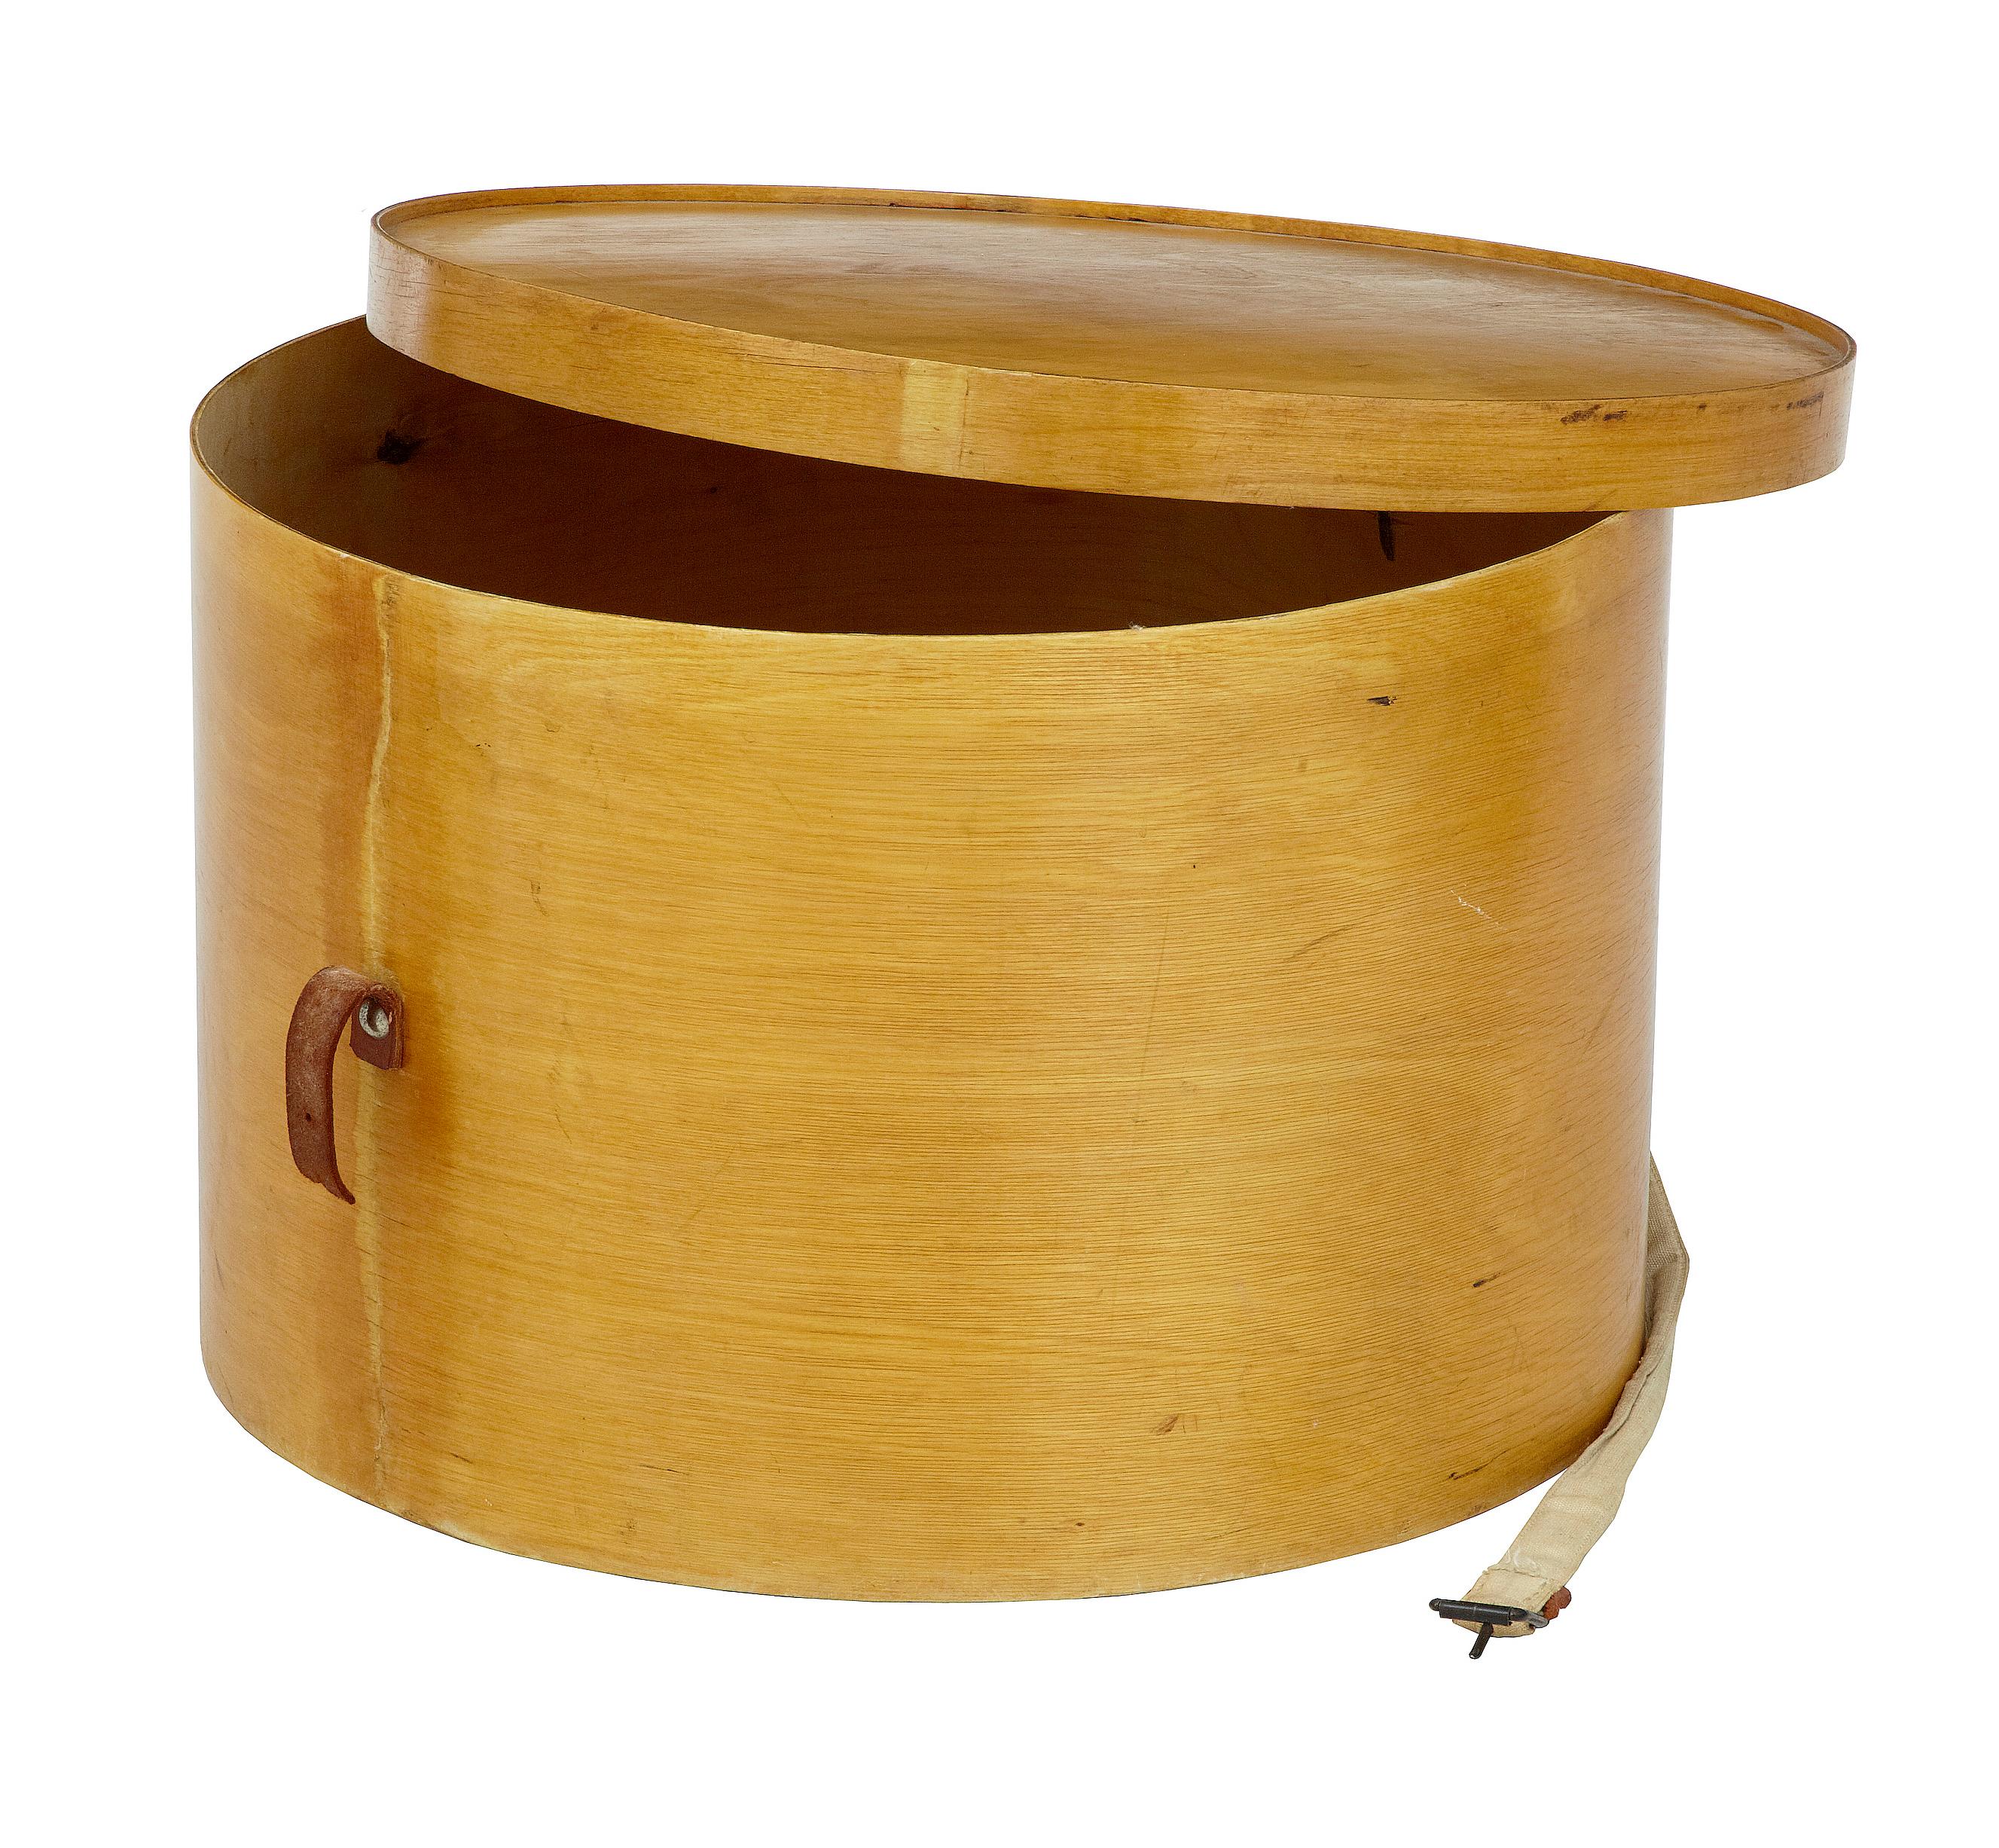 1920's luterma reval birch bent wood hat box.

Good quality shaped plywood box by the re-knowned makers luterma. Stamped on the inside of lid and on the base. In generally good condition,

Strap has broken and in need of replacement.